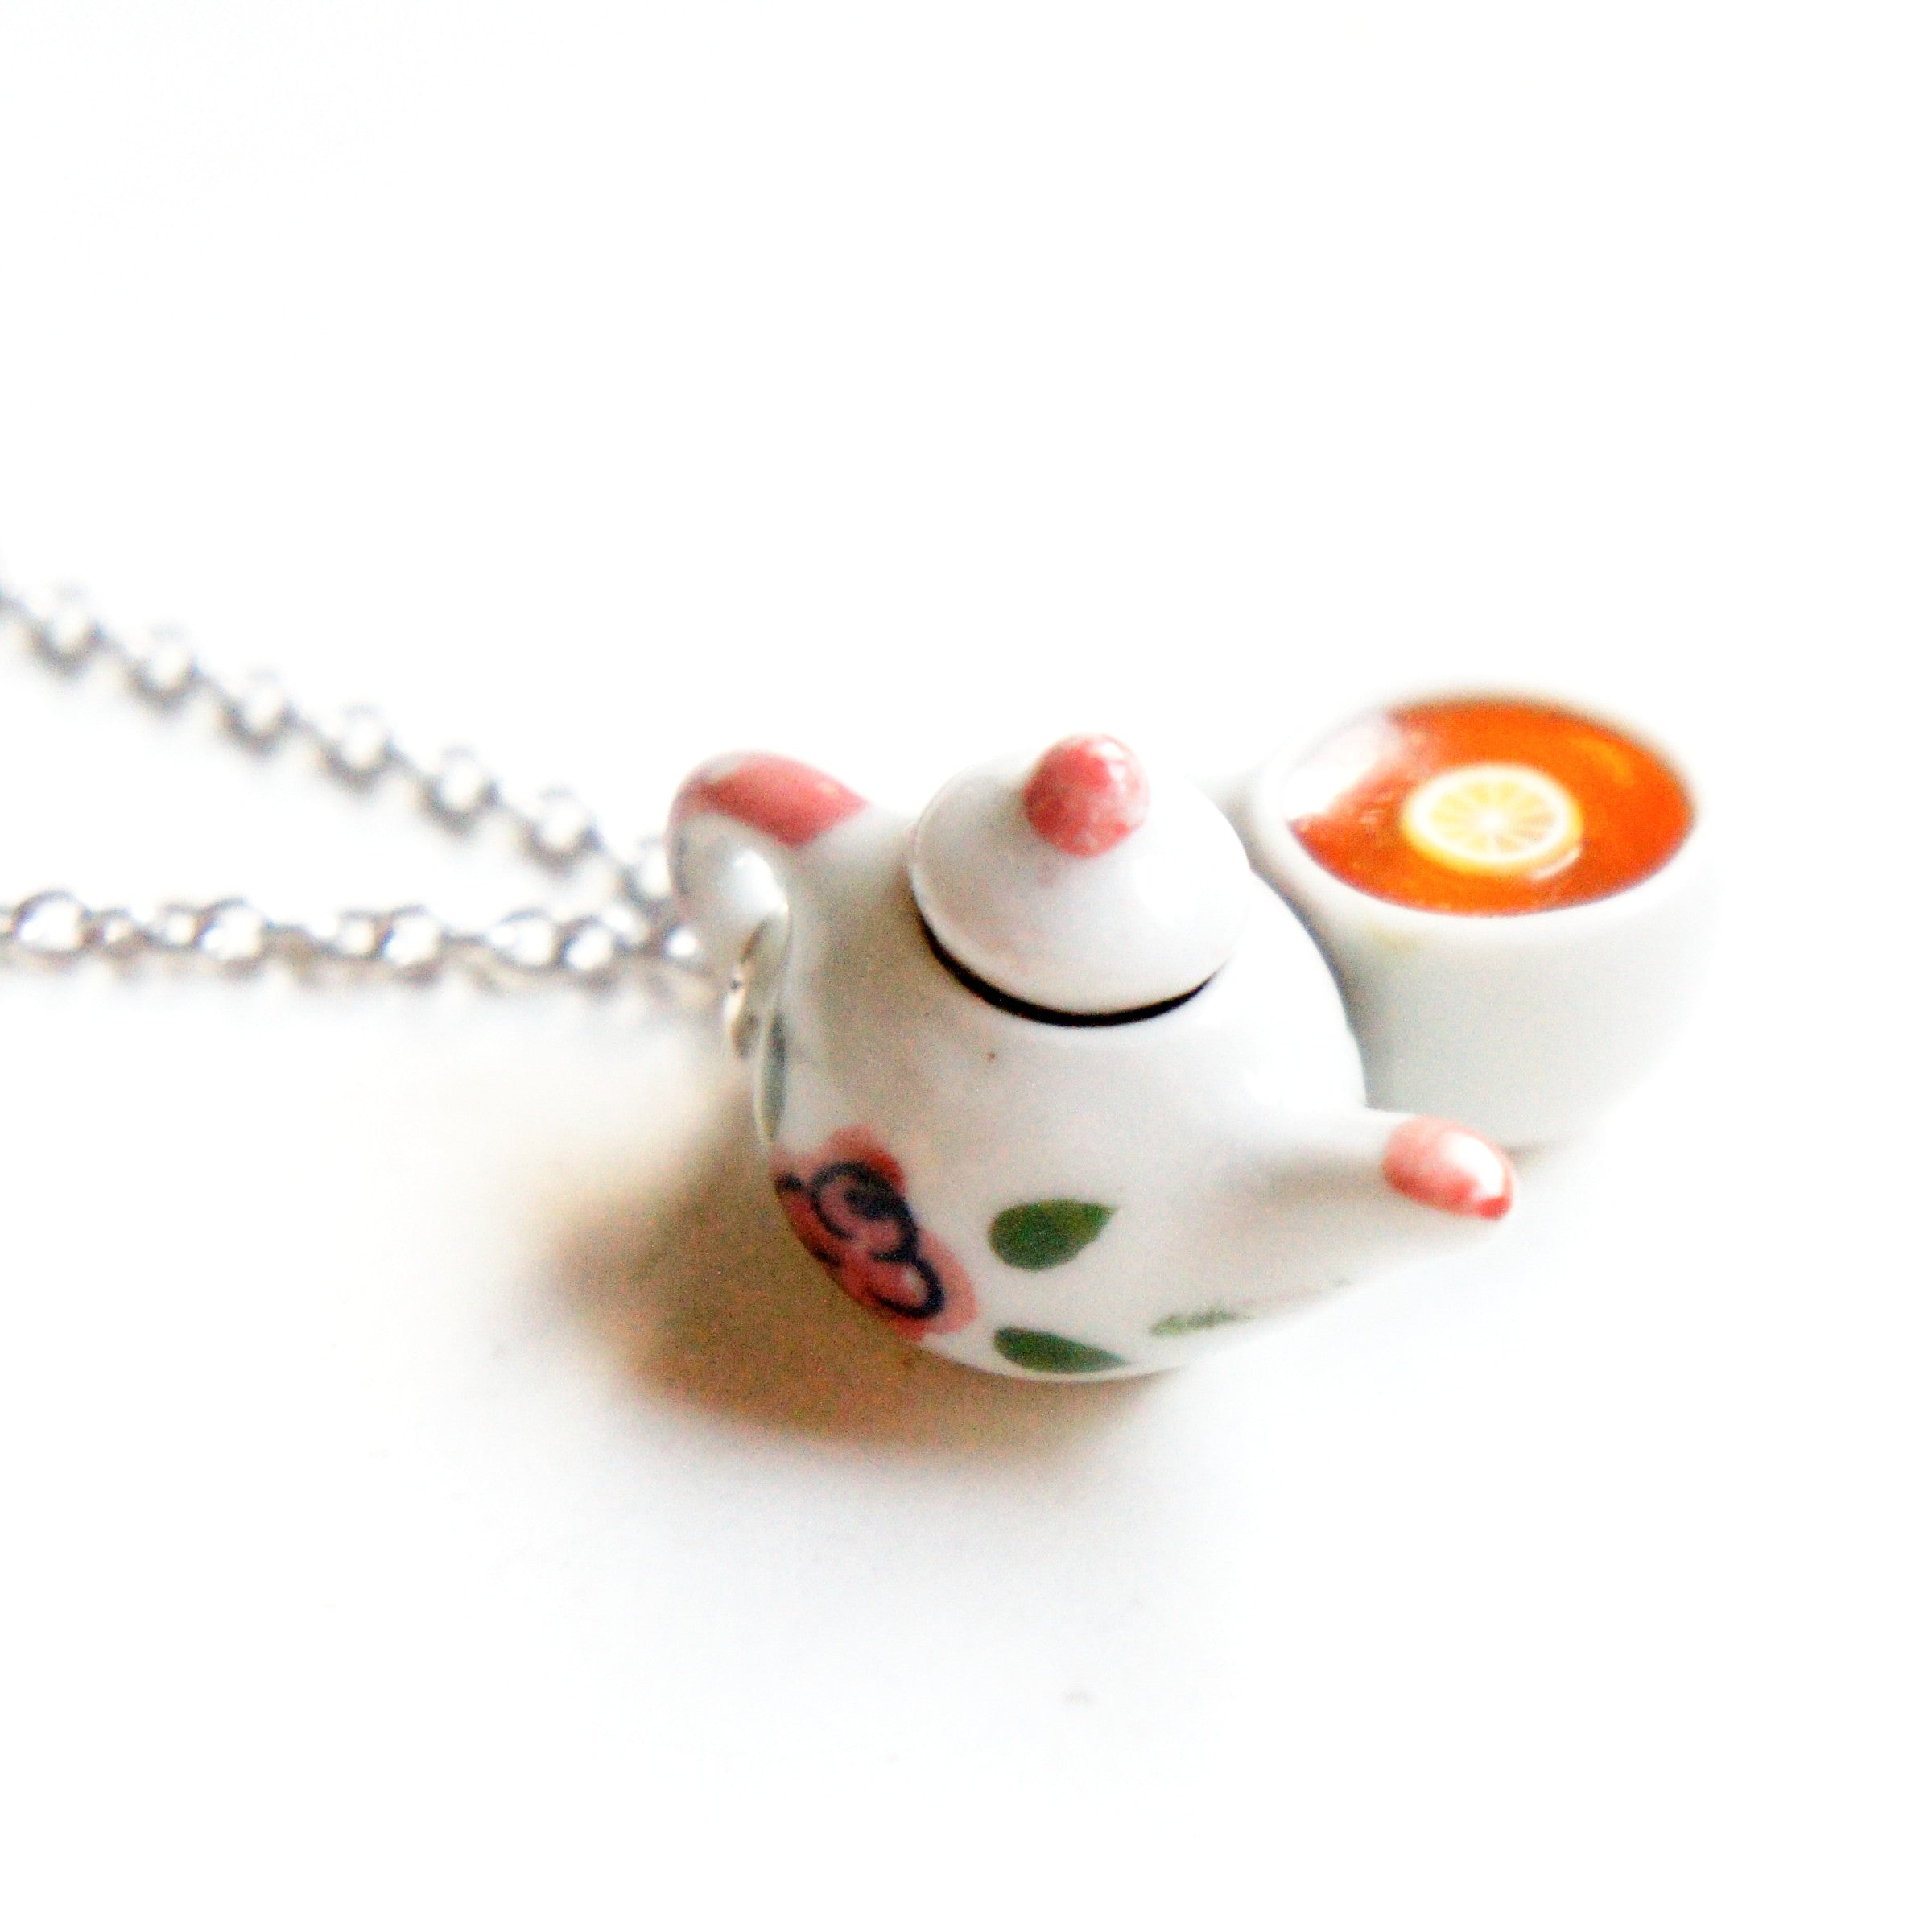 Rose Tea Set Necklace - Jillicious charms and accessories